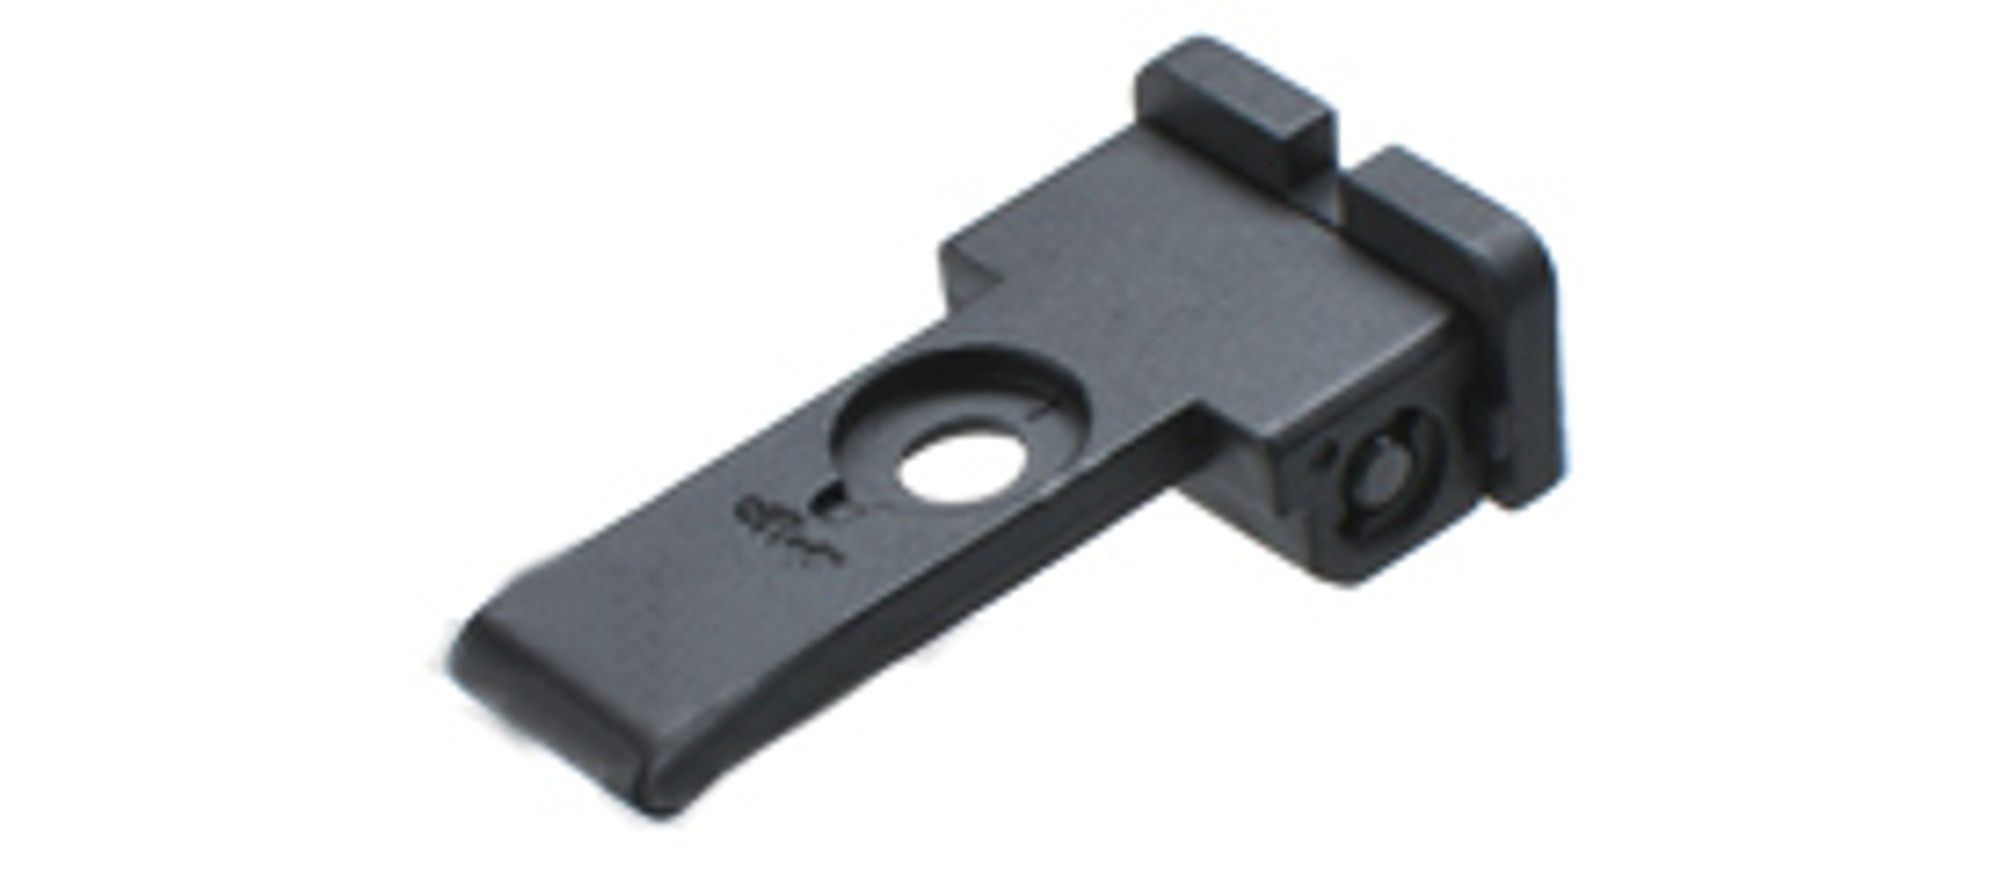 WE-Tech Rear Sight for 5.1 Hi-CAPA Series Airsoft GBB Pistols